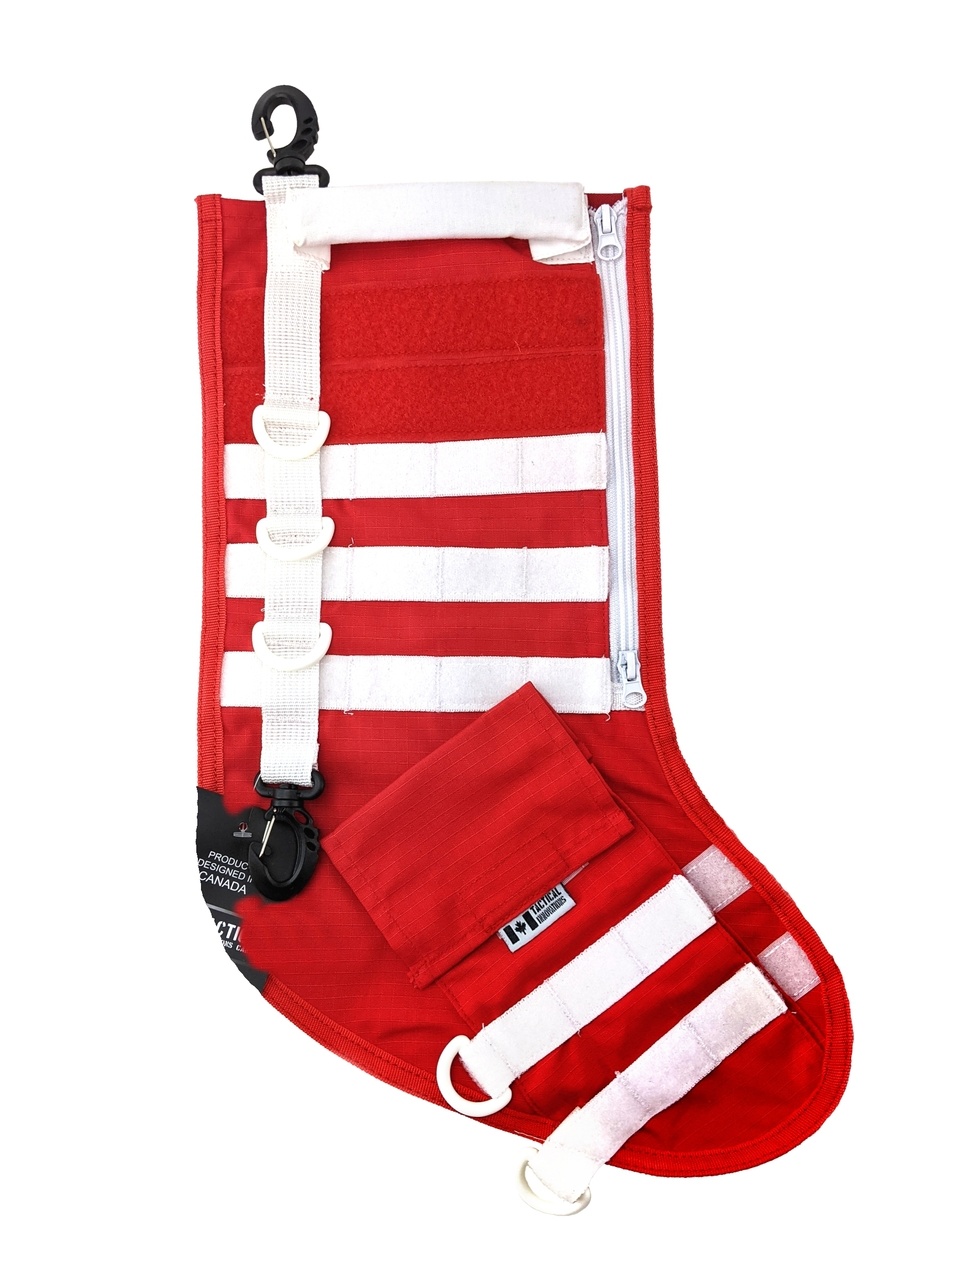 Tactical Innovations Canada Tactical Christmas Stocking